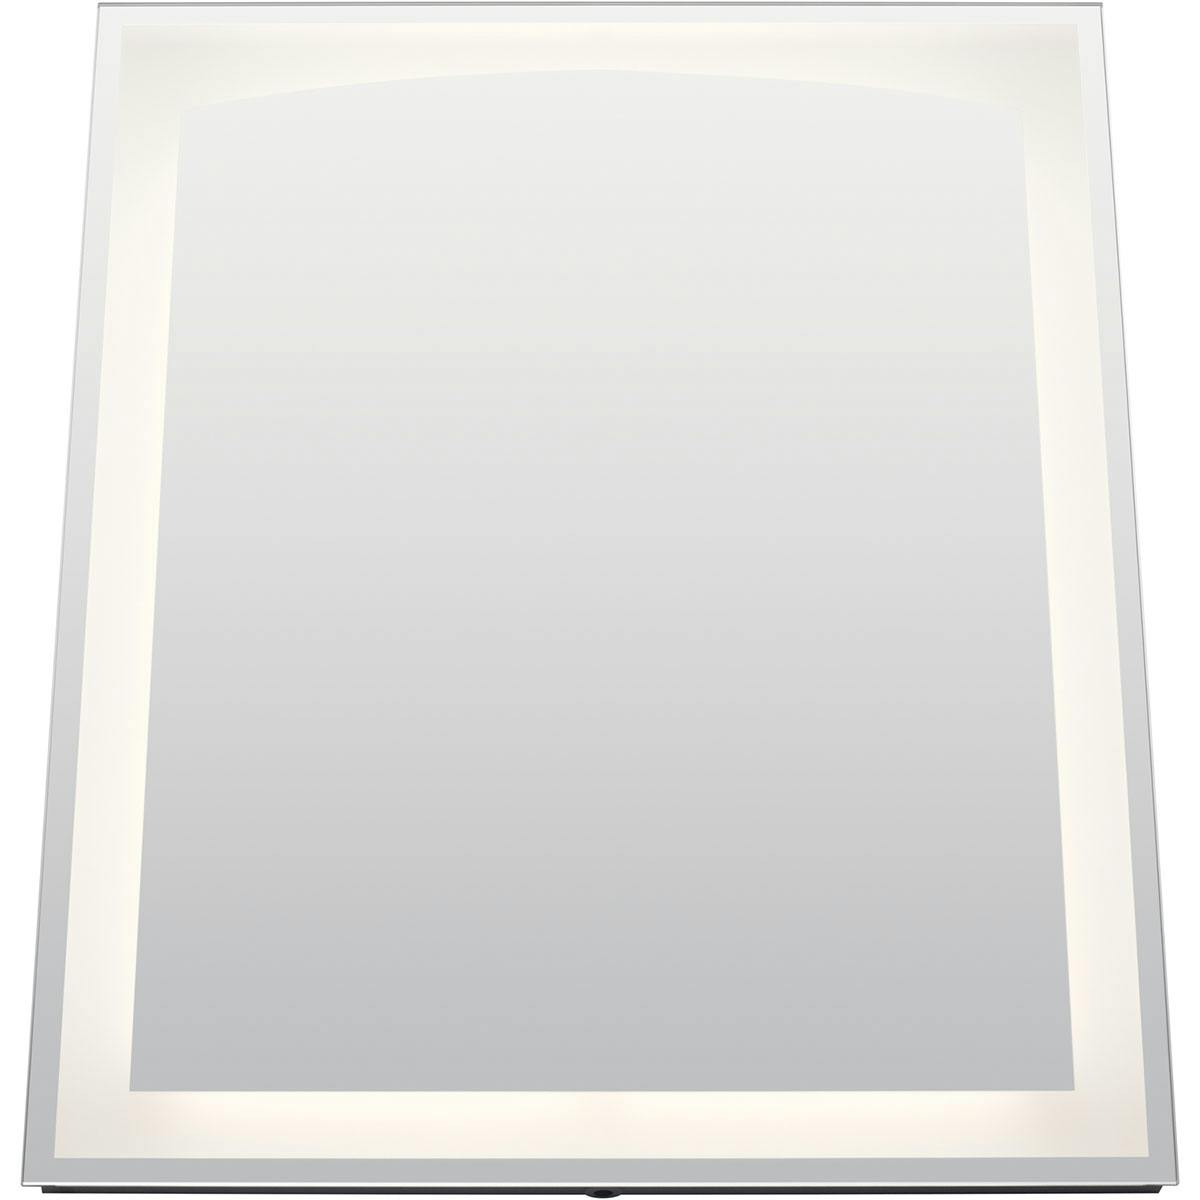 Front view of the Tyan 30" LED Vanity Mirror White on a white background